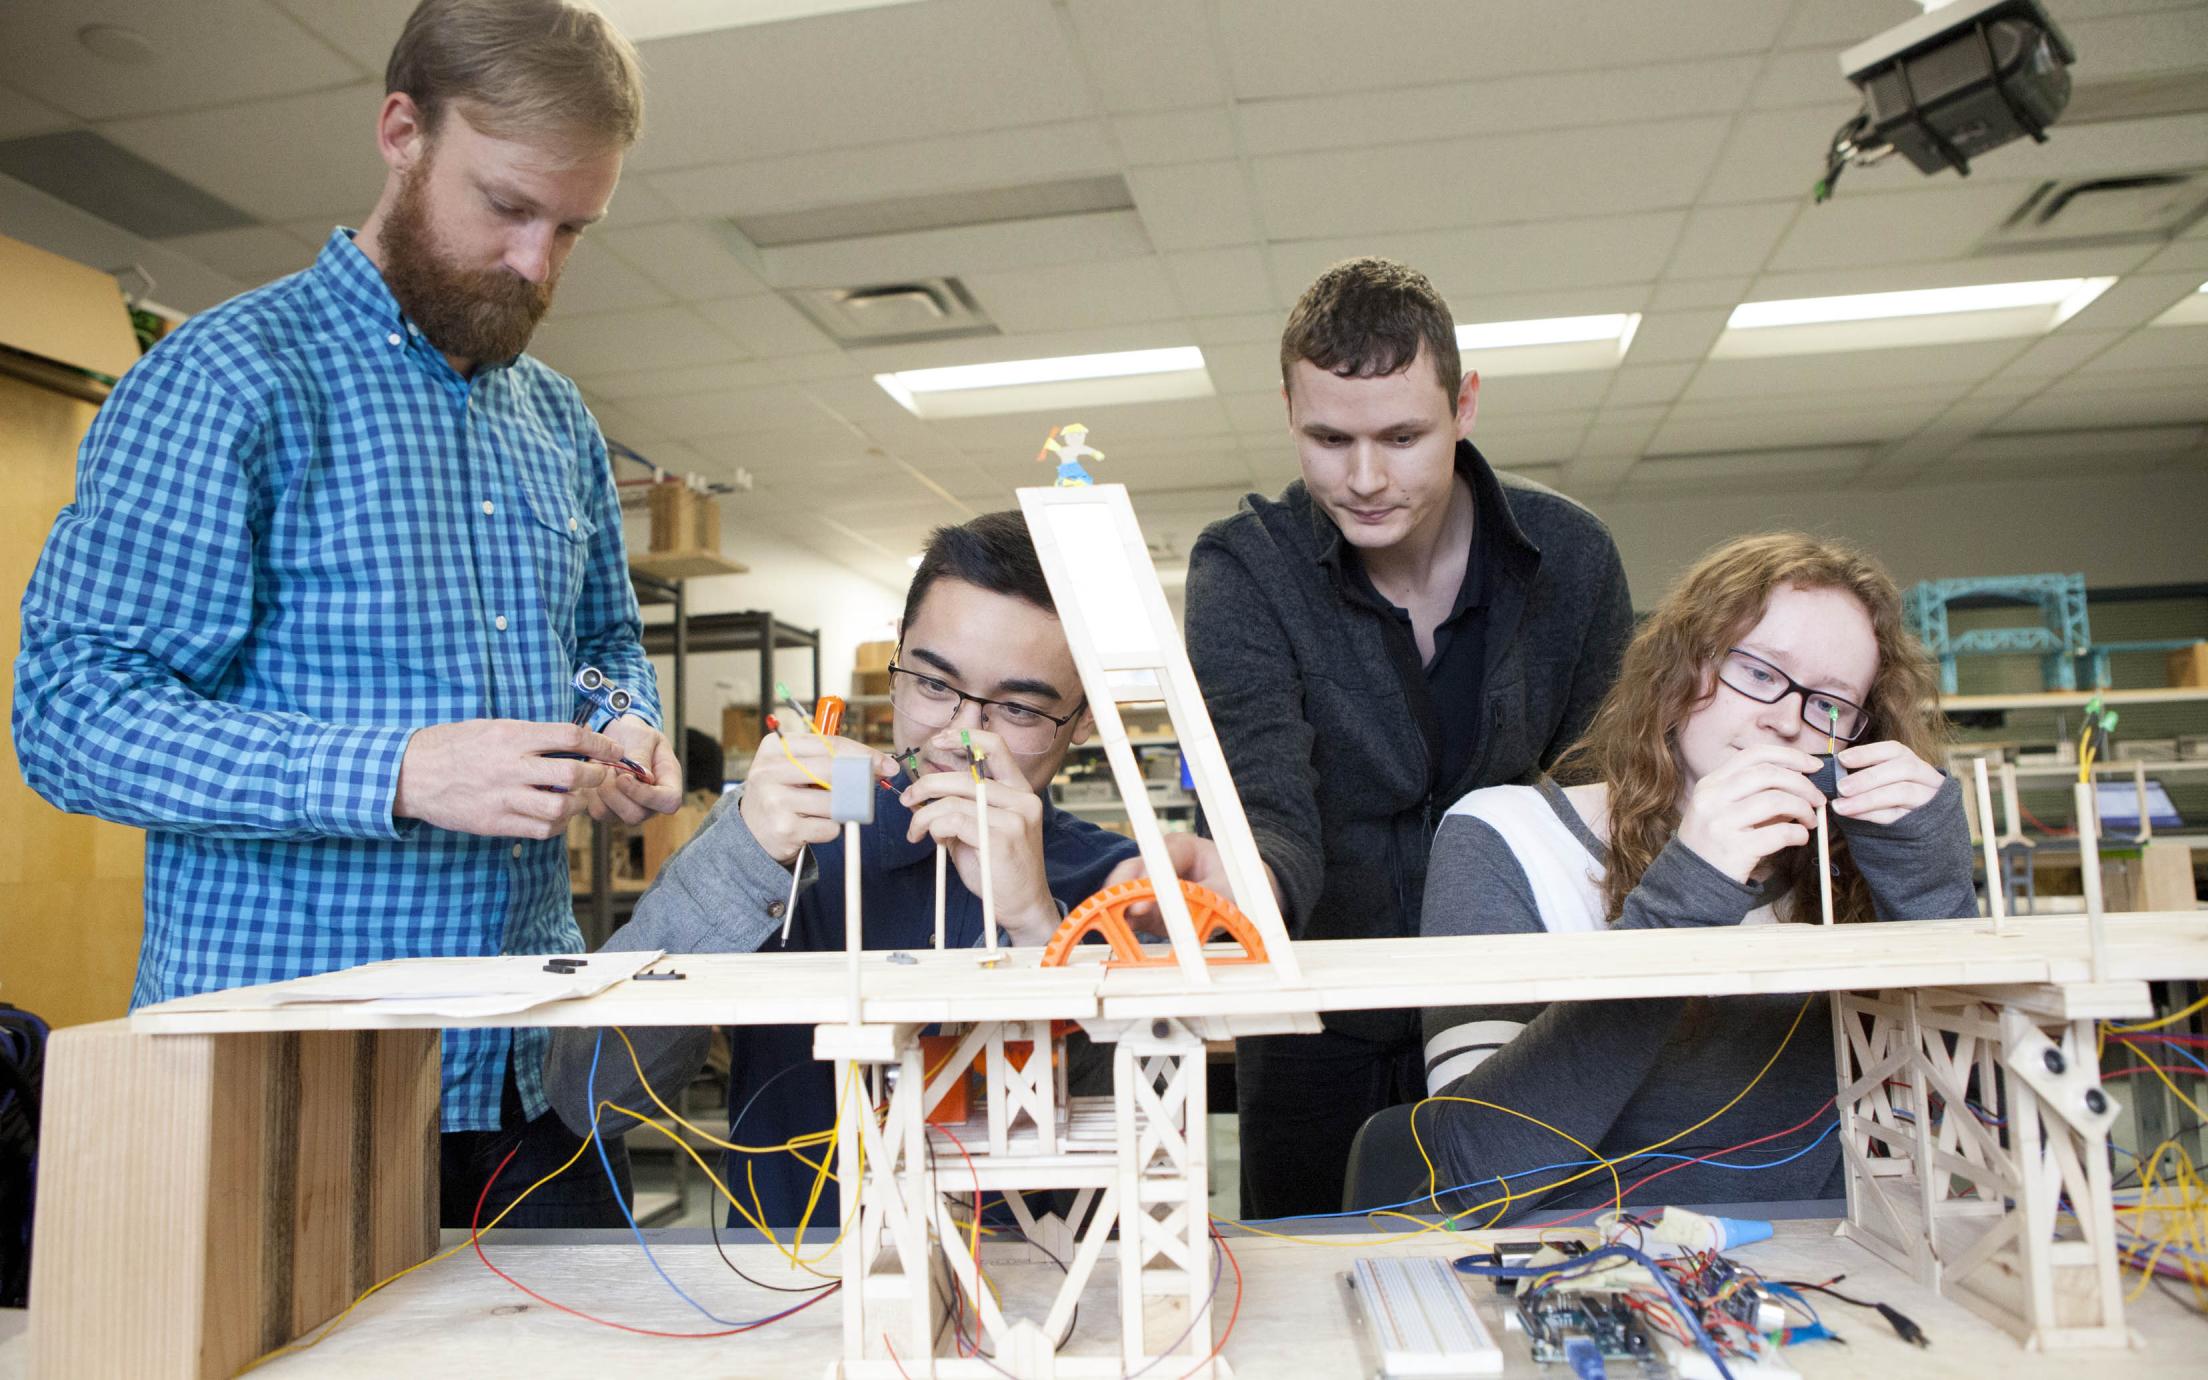 Students of the Fundamentals of Engineering Certificate Program working on a project